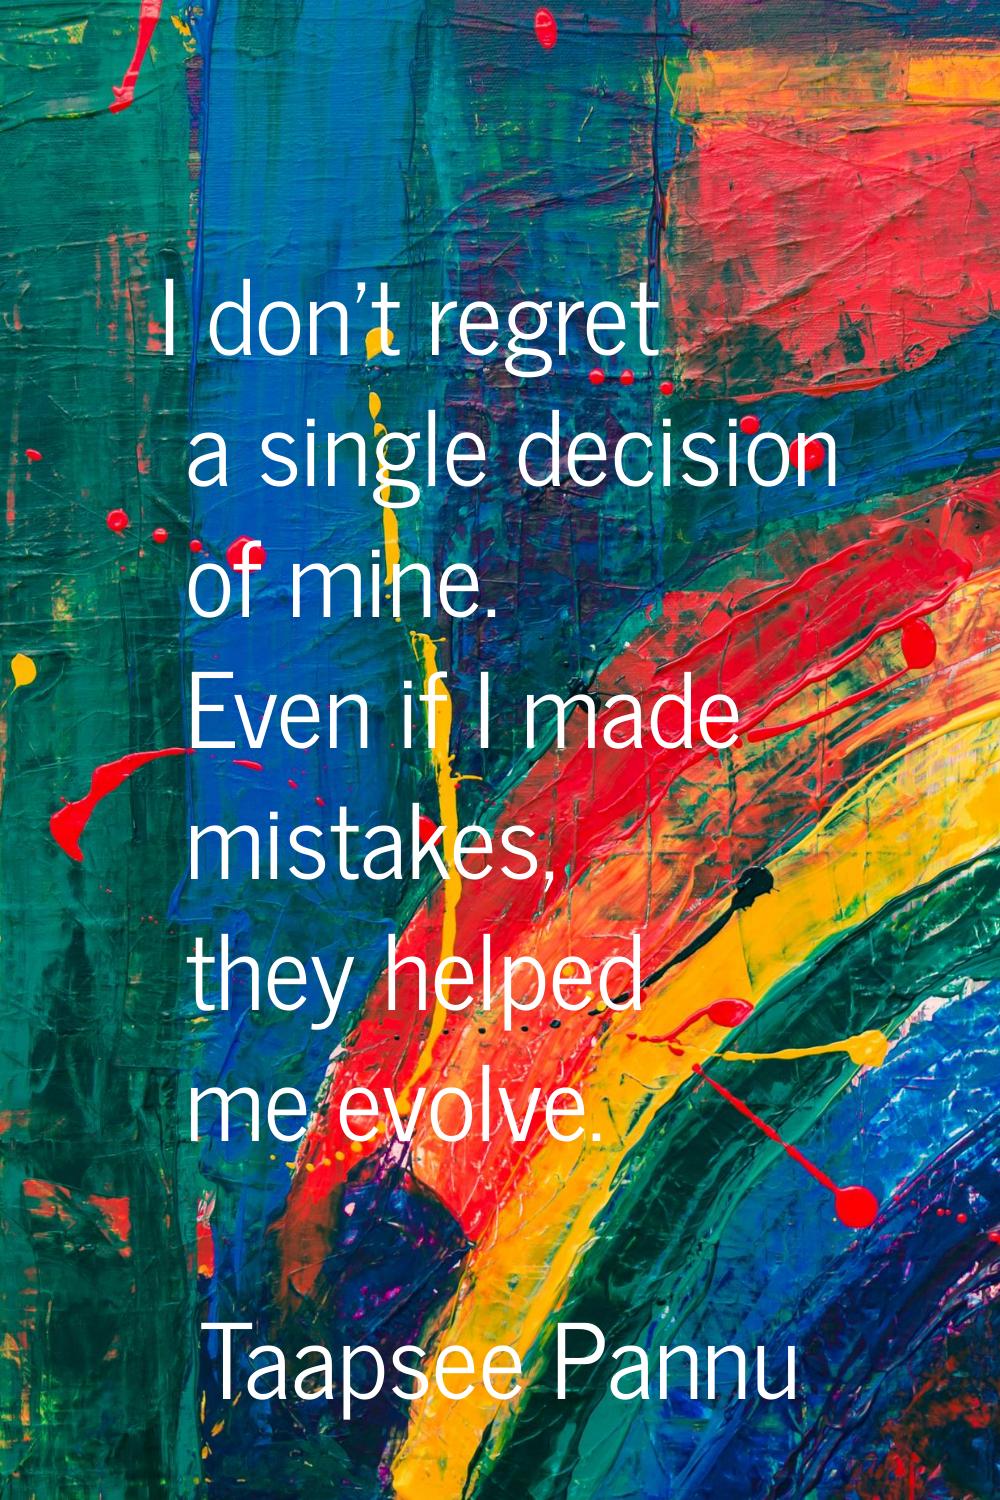 I don't regret a single decision of mine. Even if I made mistakes, they helped me evolve.